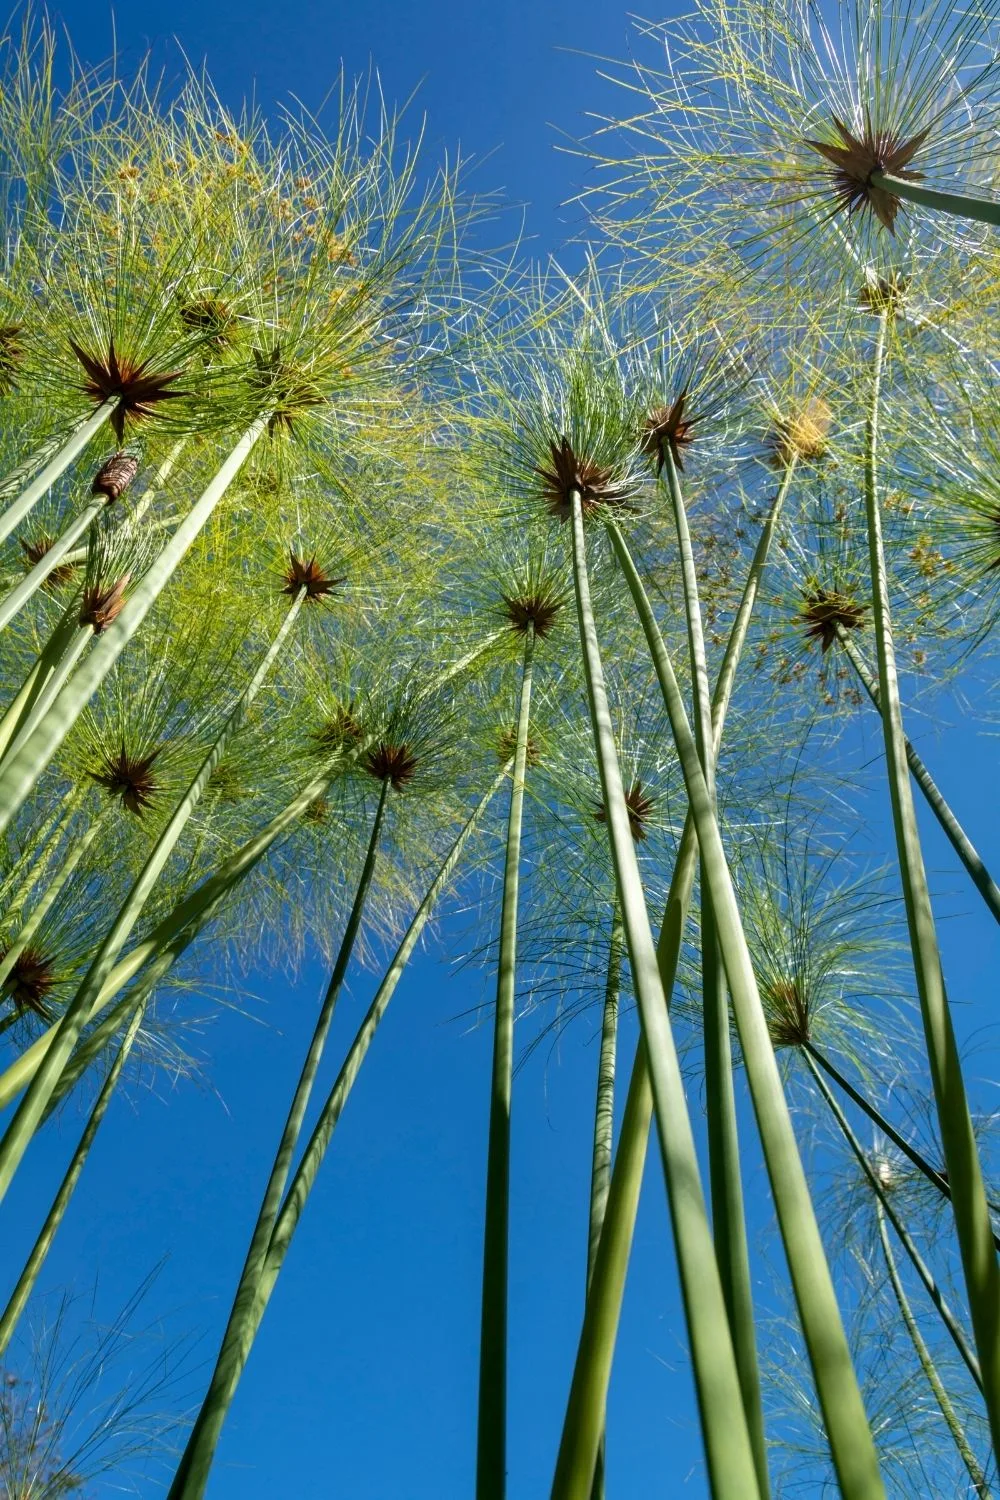 Aside from making sure it stays hydrated at all times, Papyrus (Cyperus papyrus) thrives in full sun